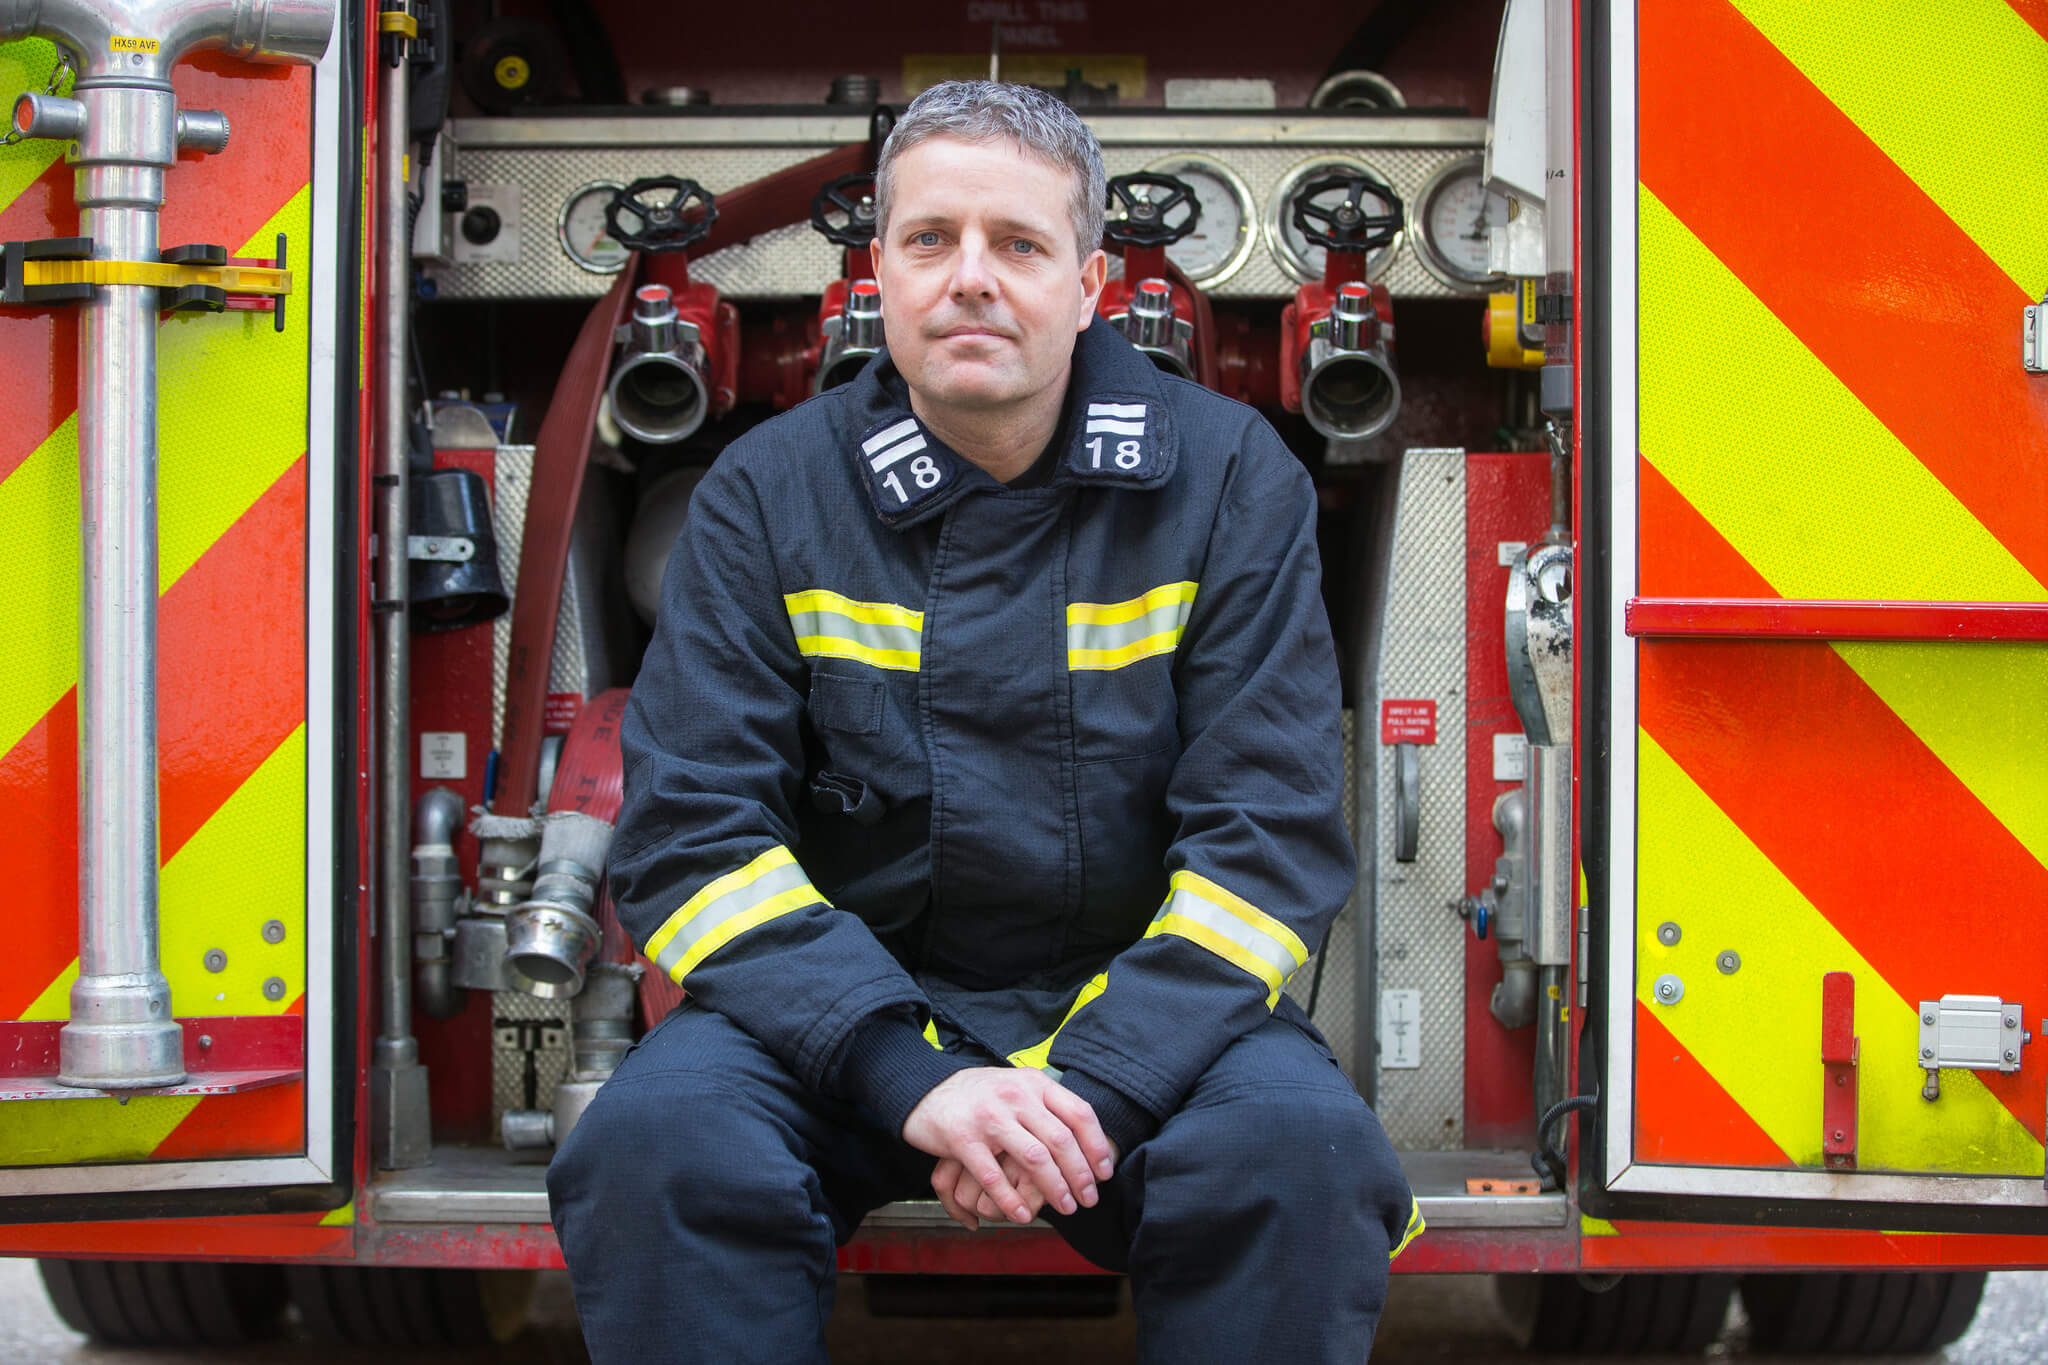 Firefighter sitting in back of fire engine